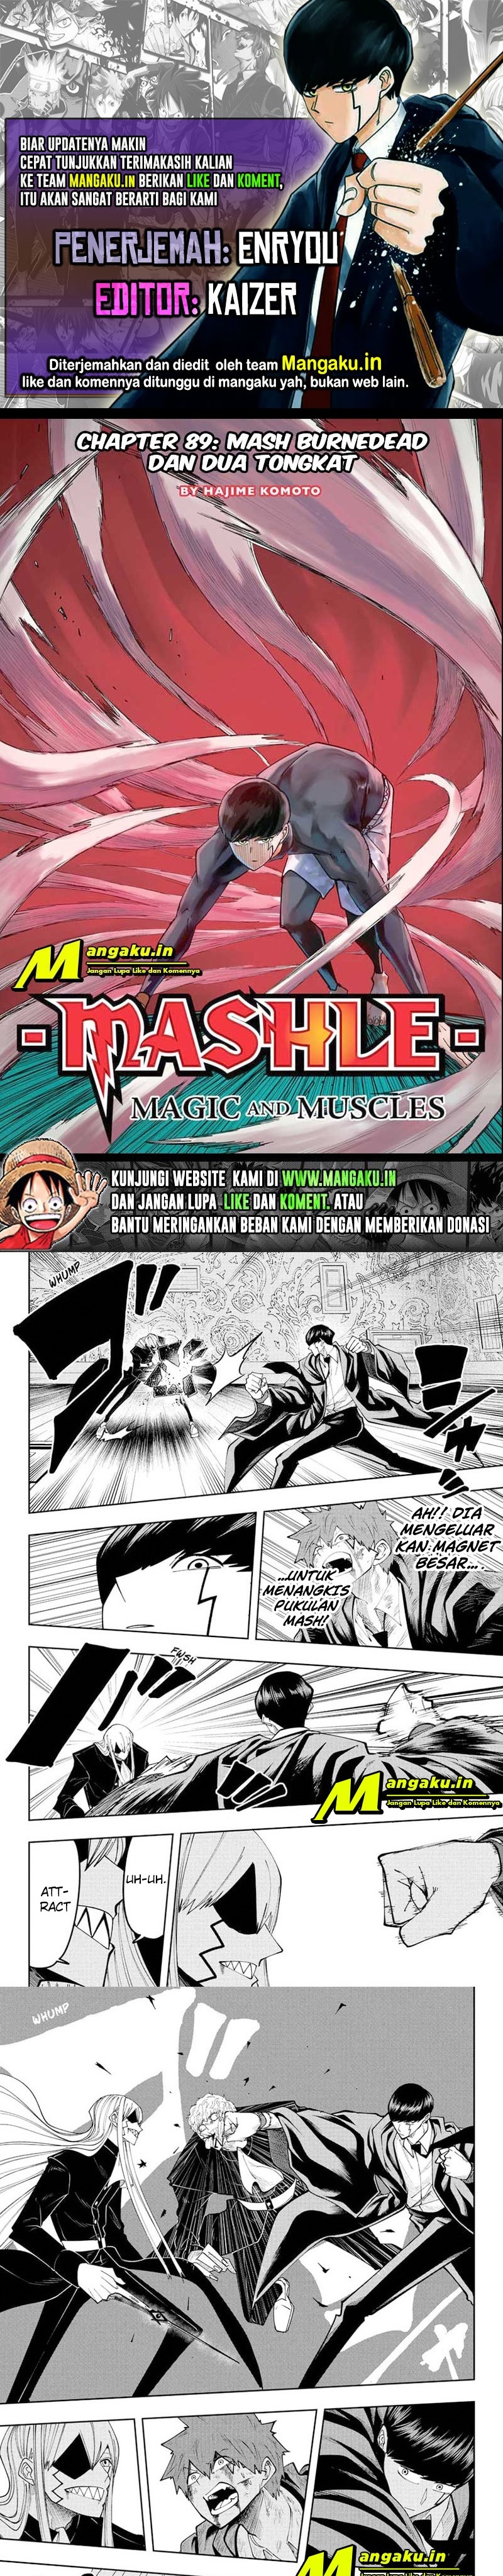 Mashle: Magic and Muscles Chapter 89